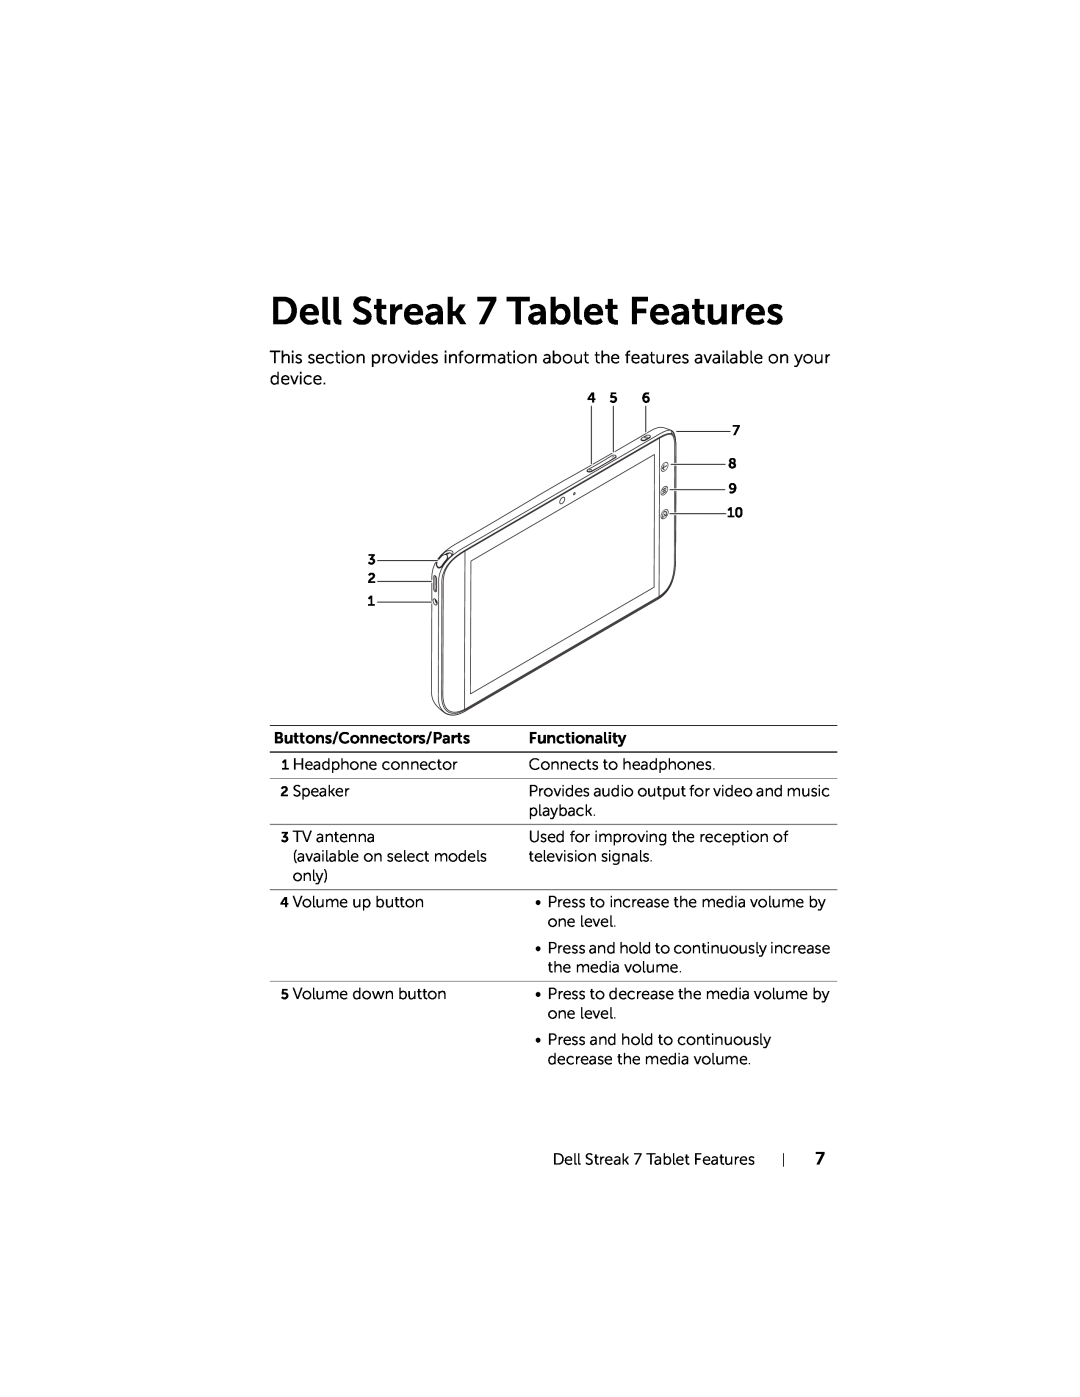 Dell user manual Dell Streak 7 Tablet Features 